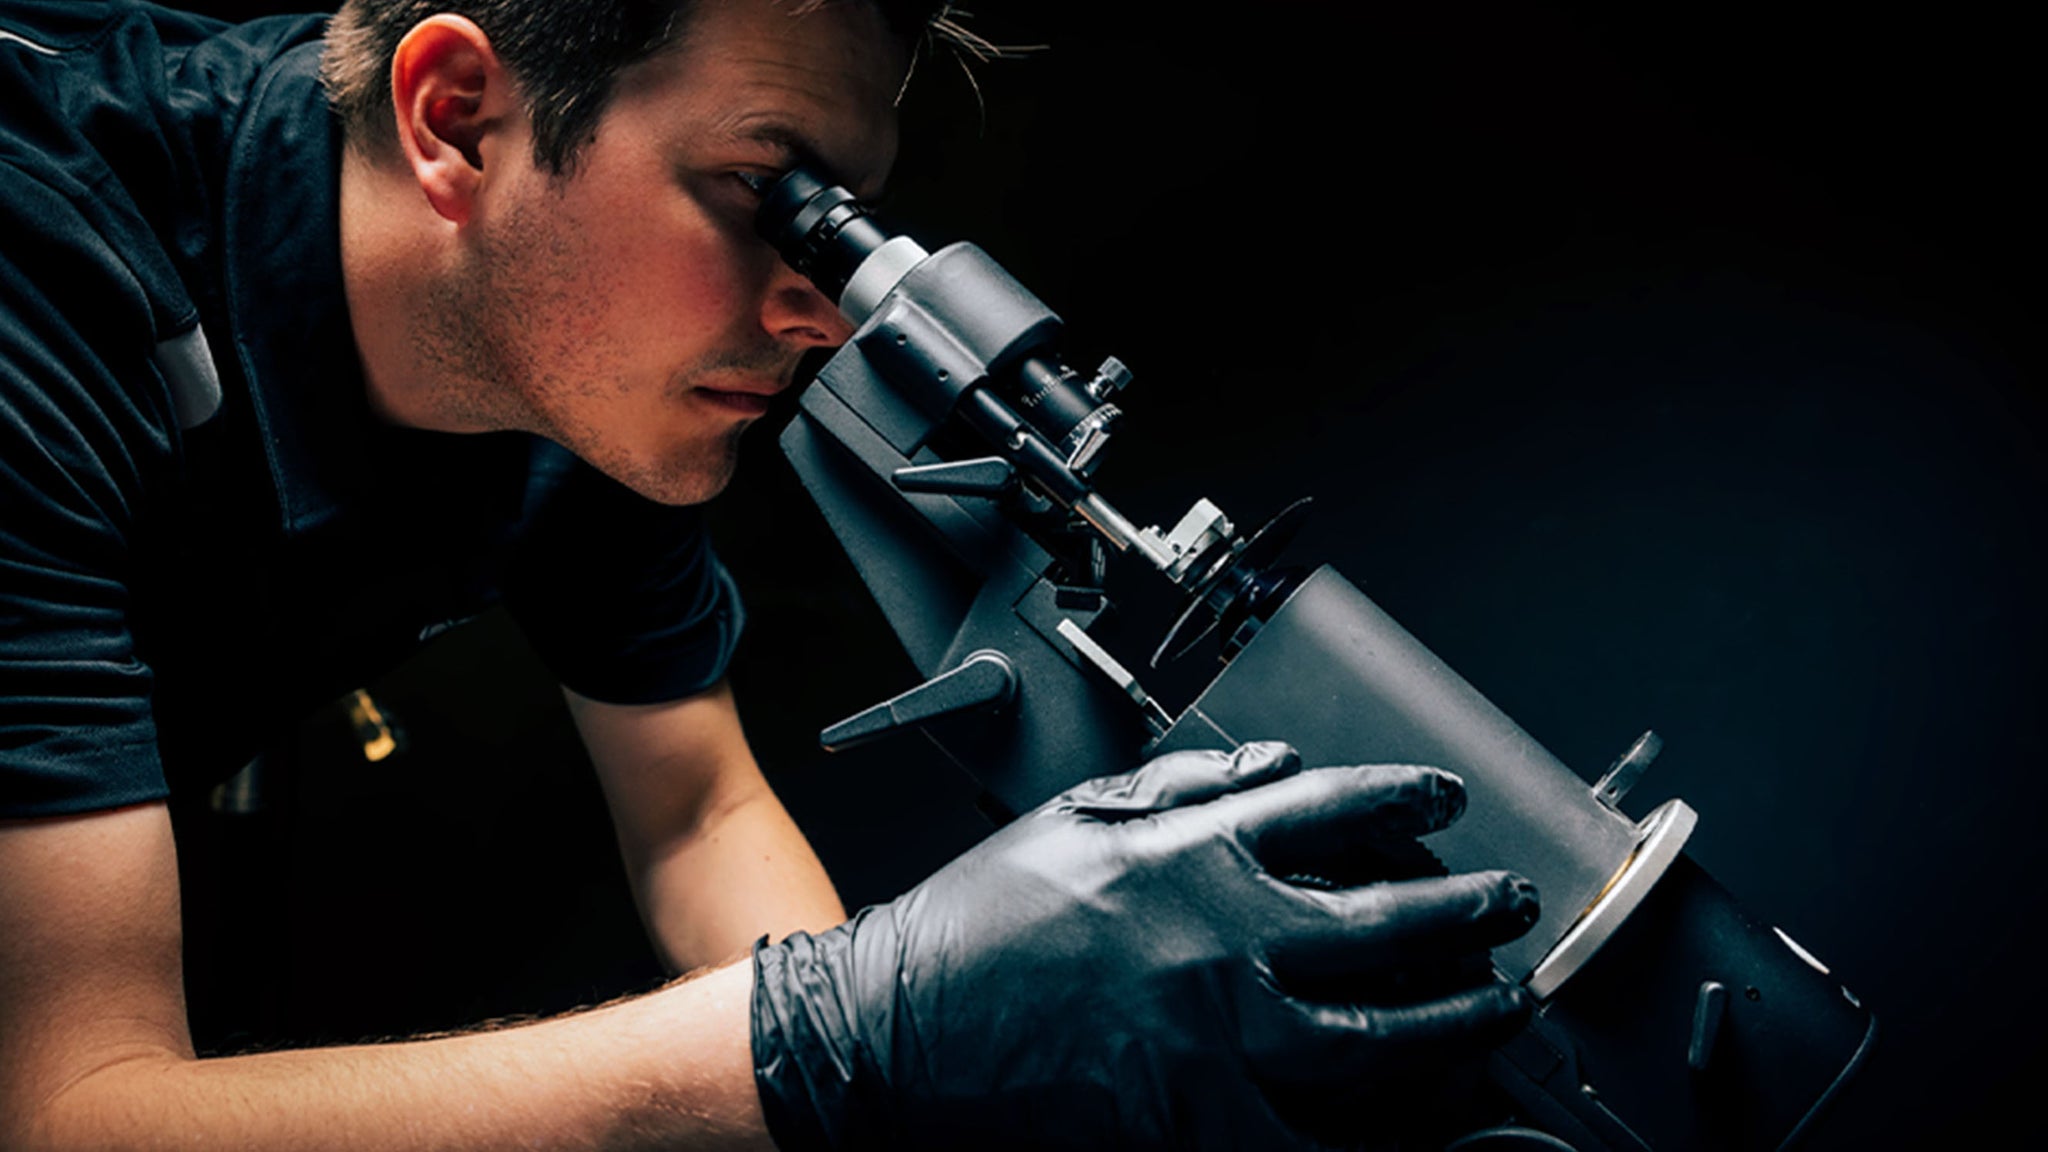 Man leaning down to look into a microscope with a sunglass lens sitting in front of it.